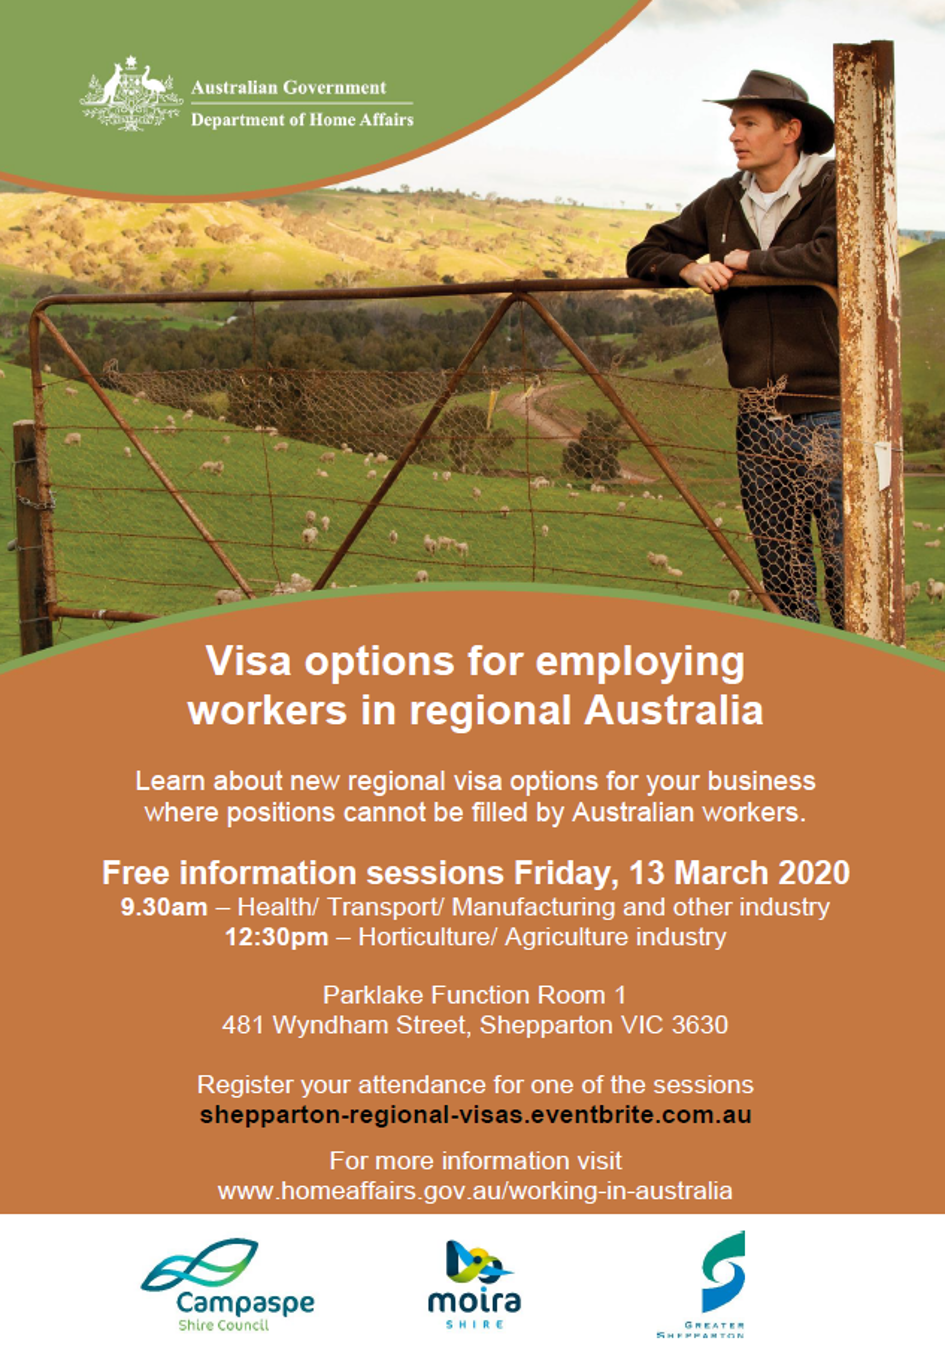 Visa options for employing workers in regional Australia info session flyer